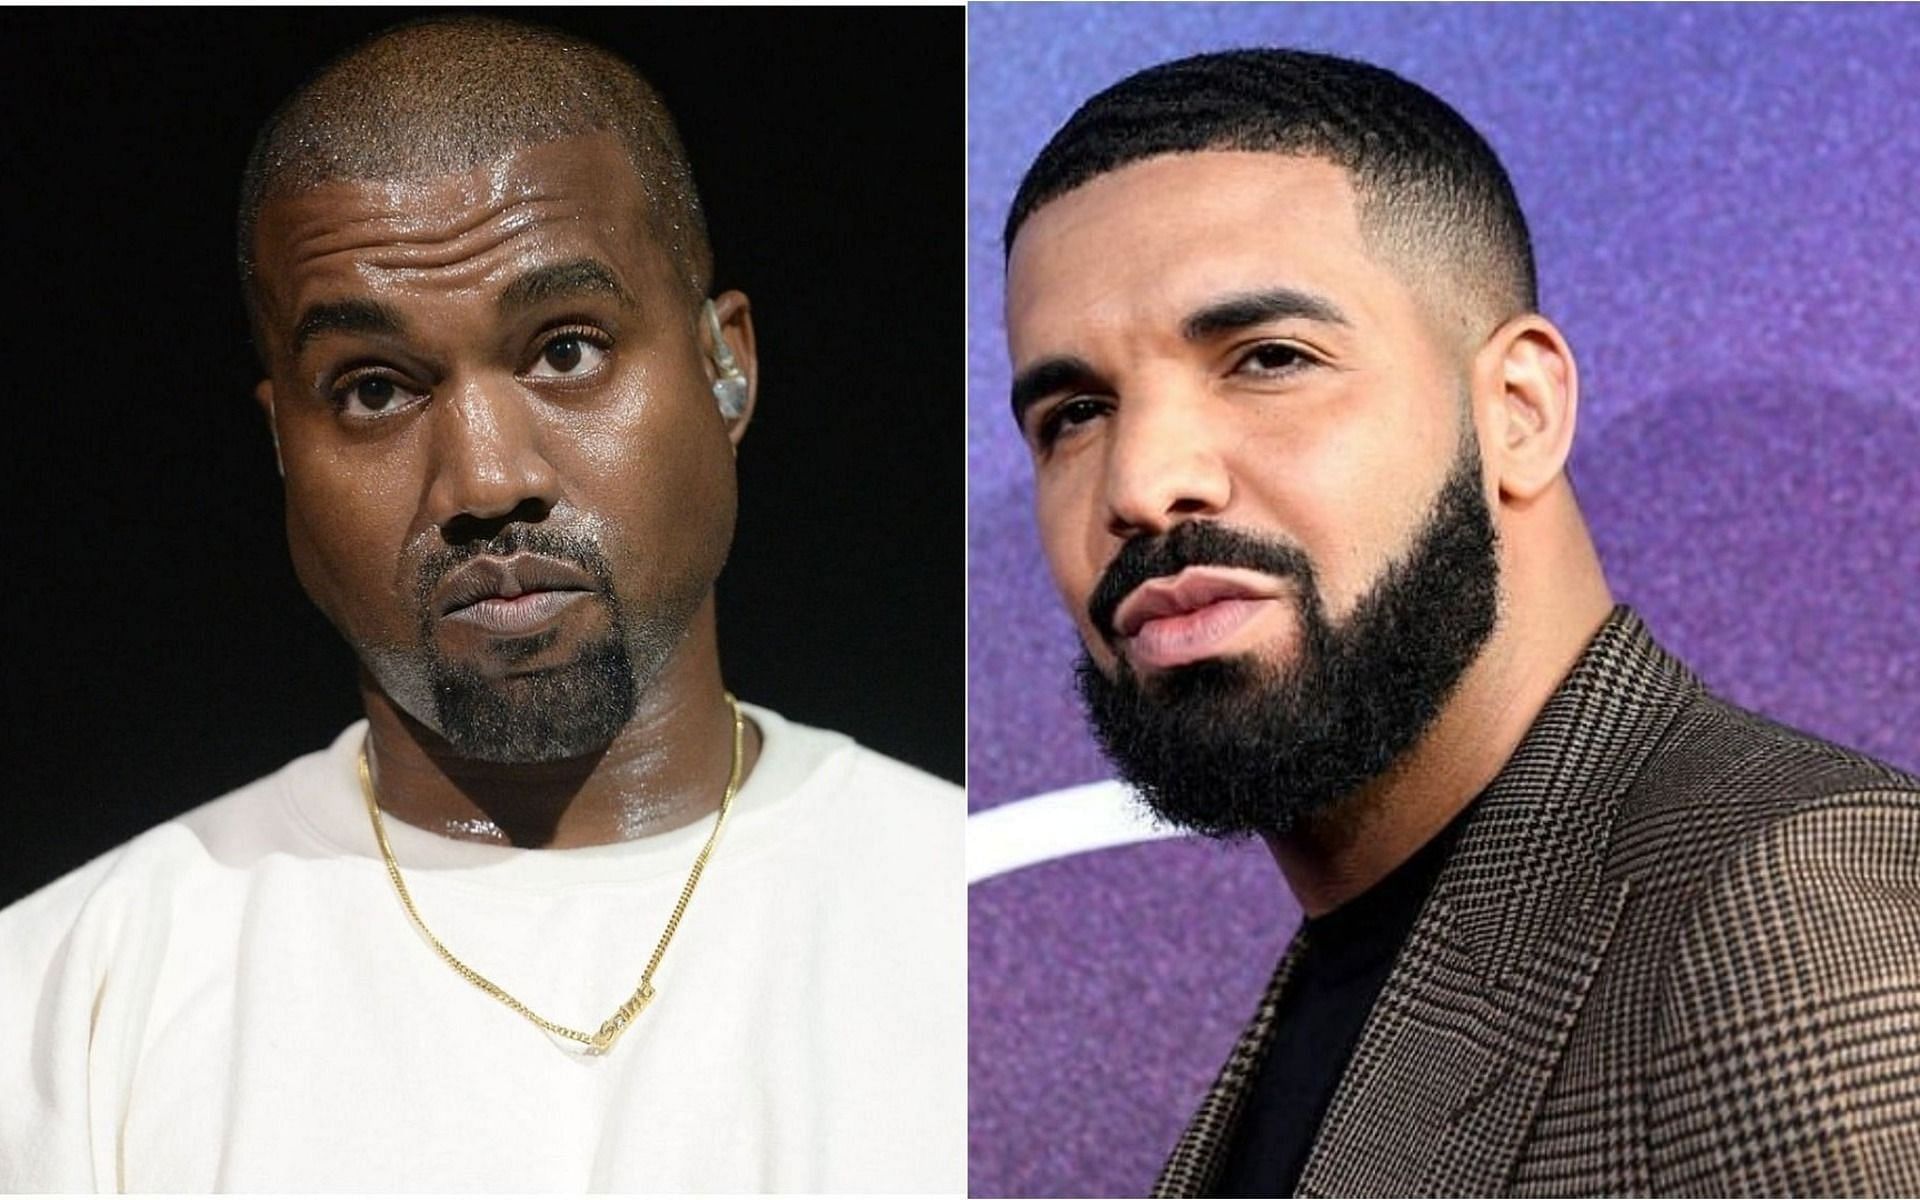 Kanye West and Drake to perform at Free Larry Hoover concert (Images via Getty Images)